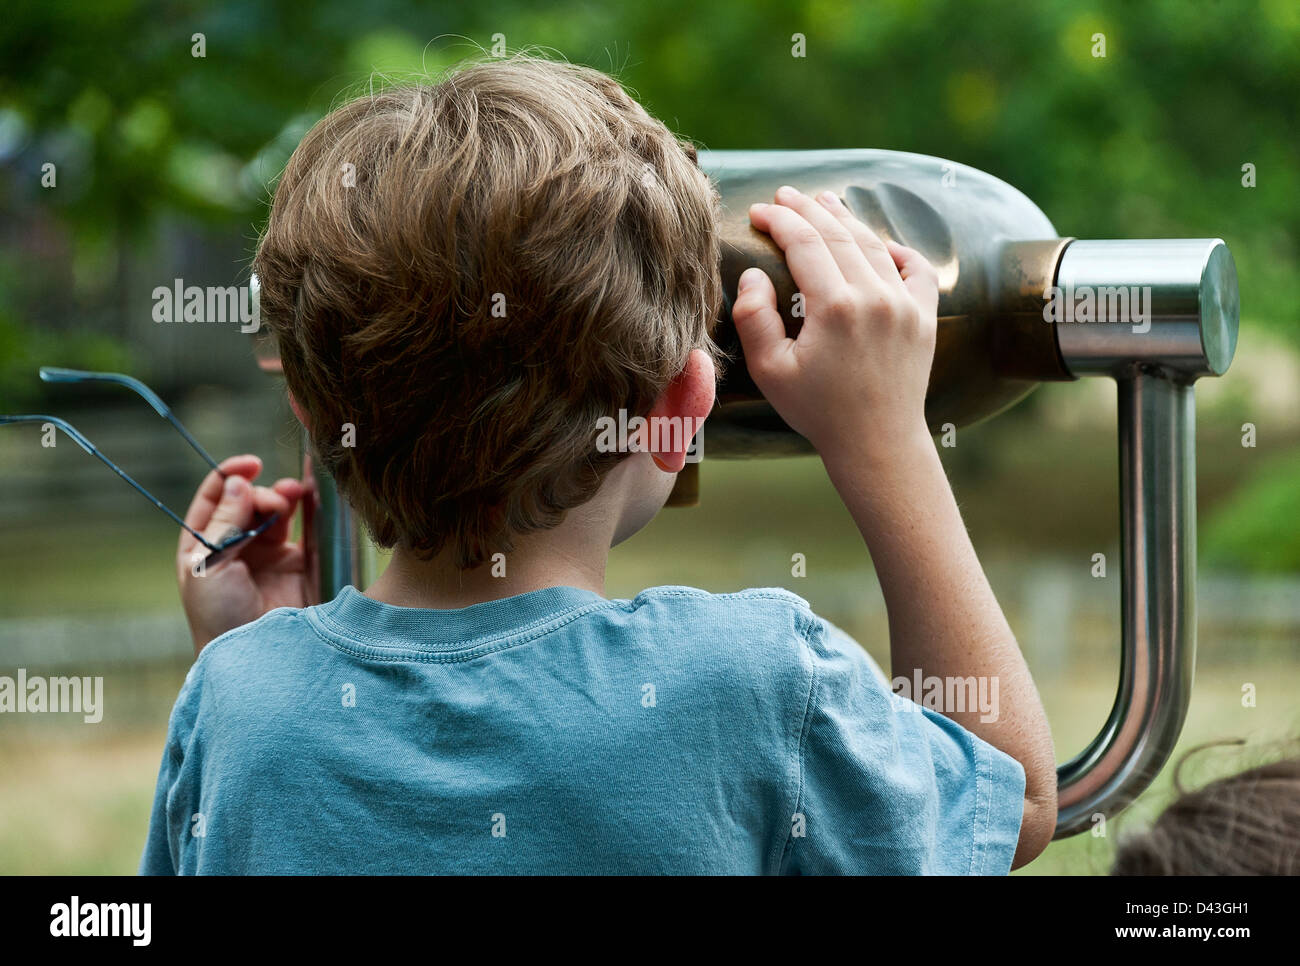 Boy looking through a viewing scope. Stock Photo